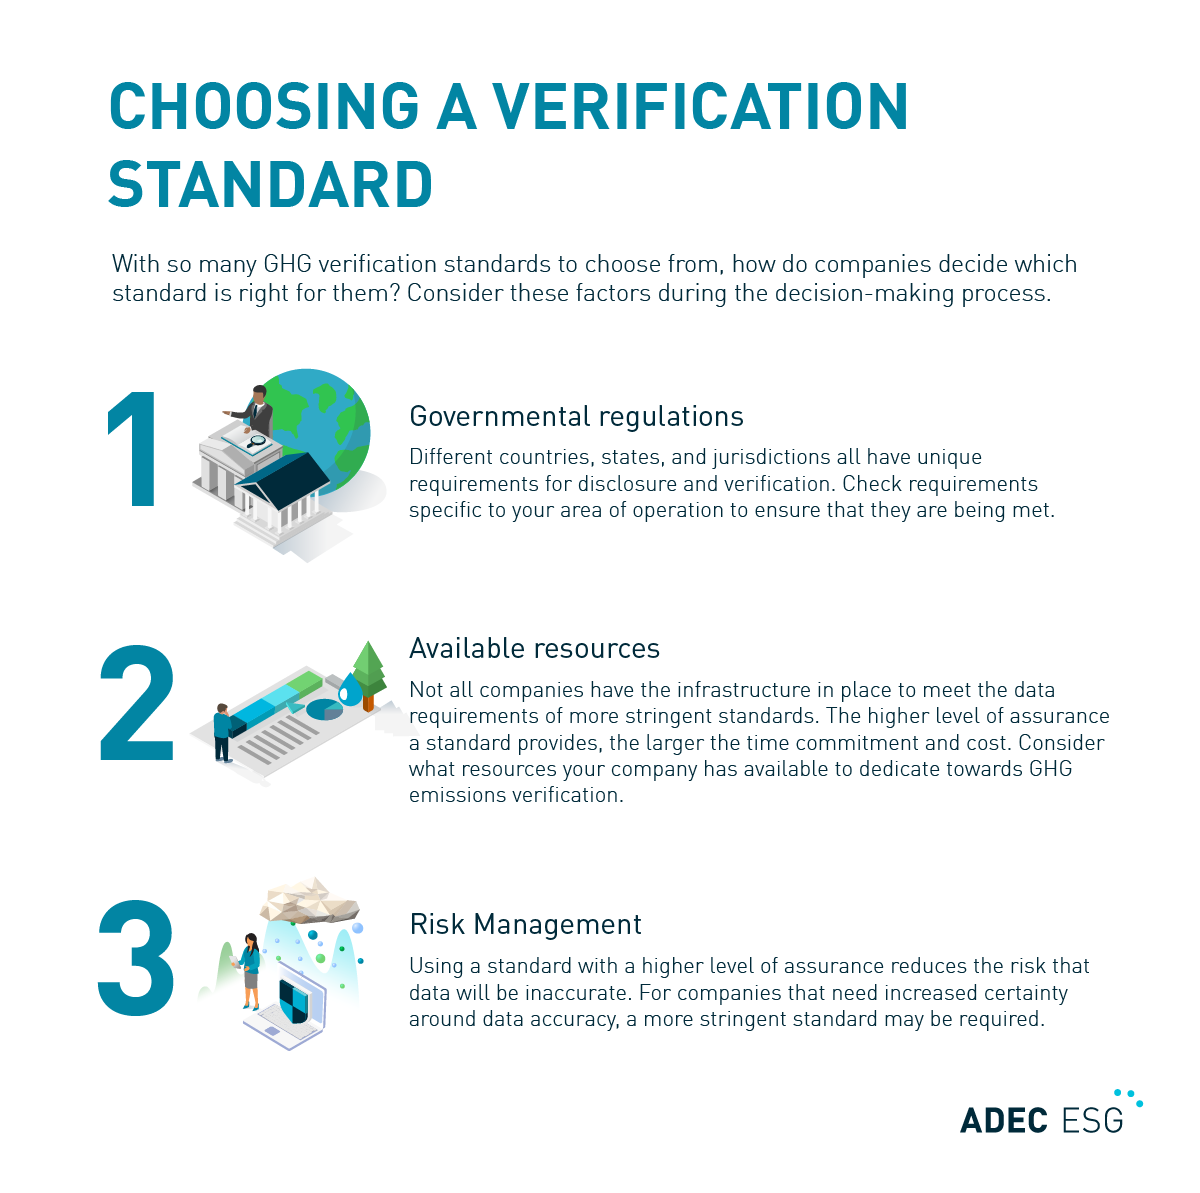 Factors to consider in choosing a verification standard, including government regulations, available resources, and risk management.